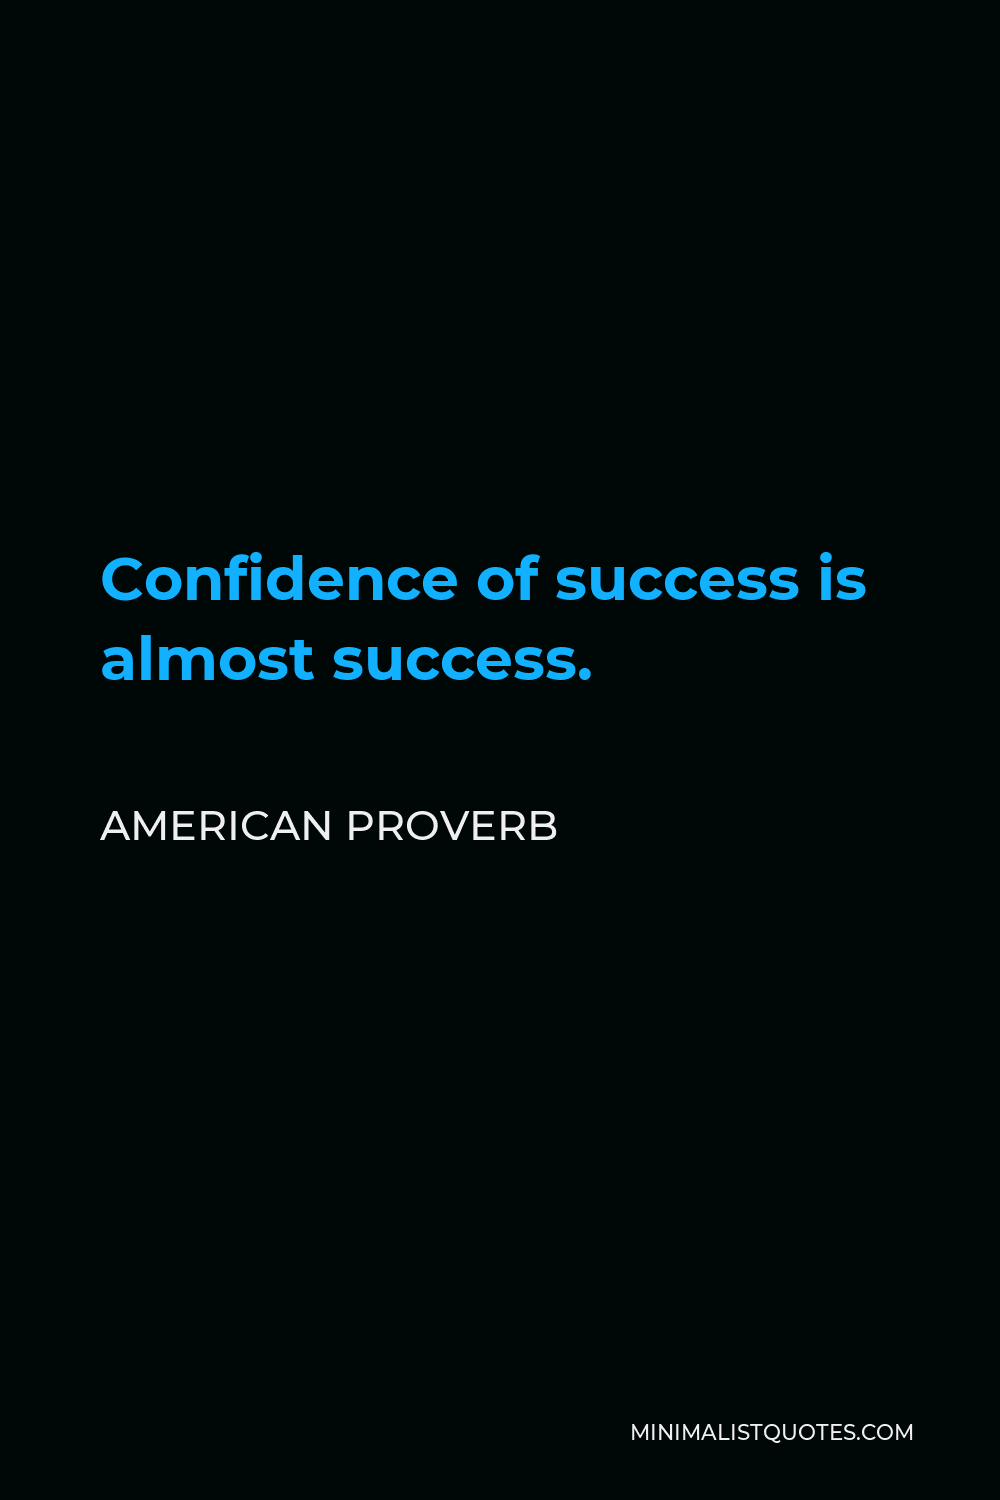 American Proverb Quote - Confidence of success is almost success.